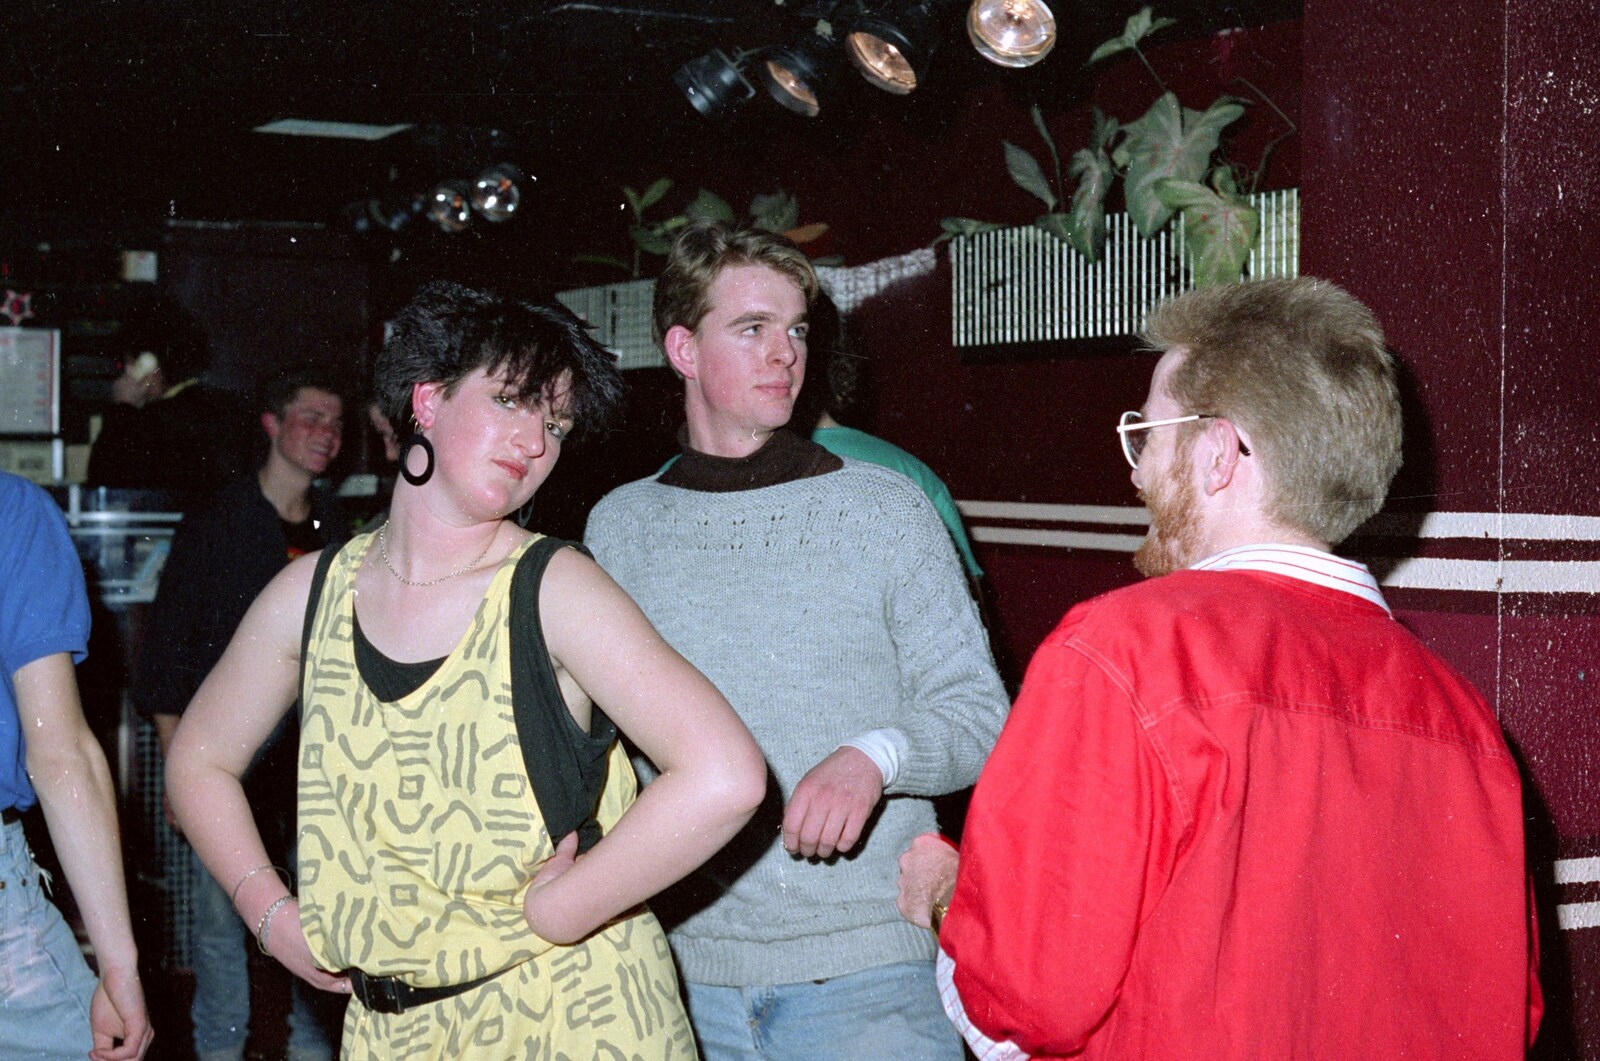 Party Girl looks over from Uni: A Party in Snobs Nightclub, Mayflower Street, Plymouth - 18th October 1986